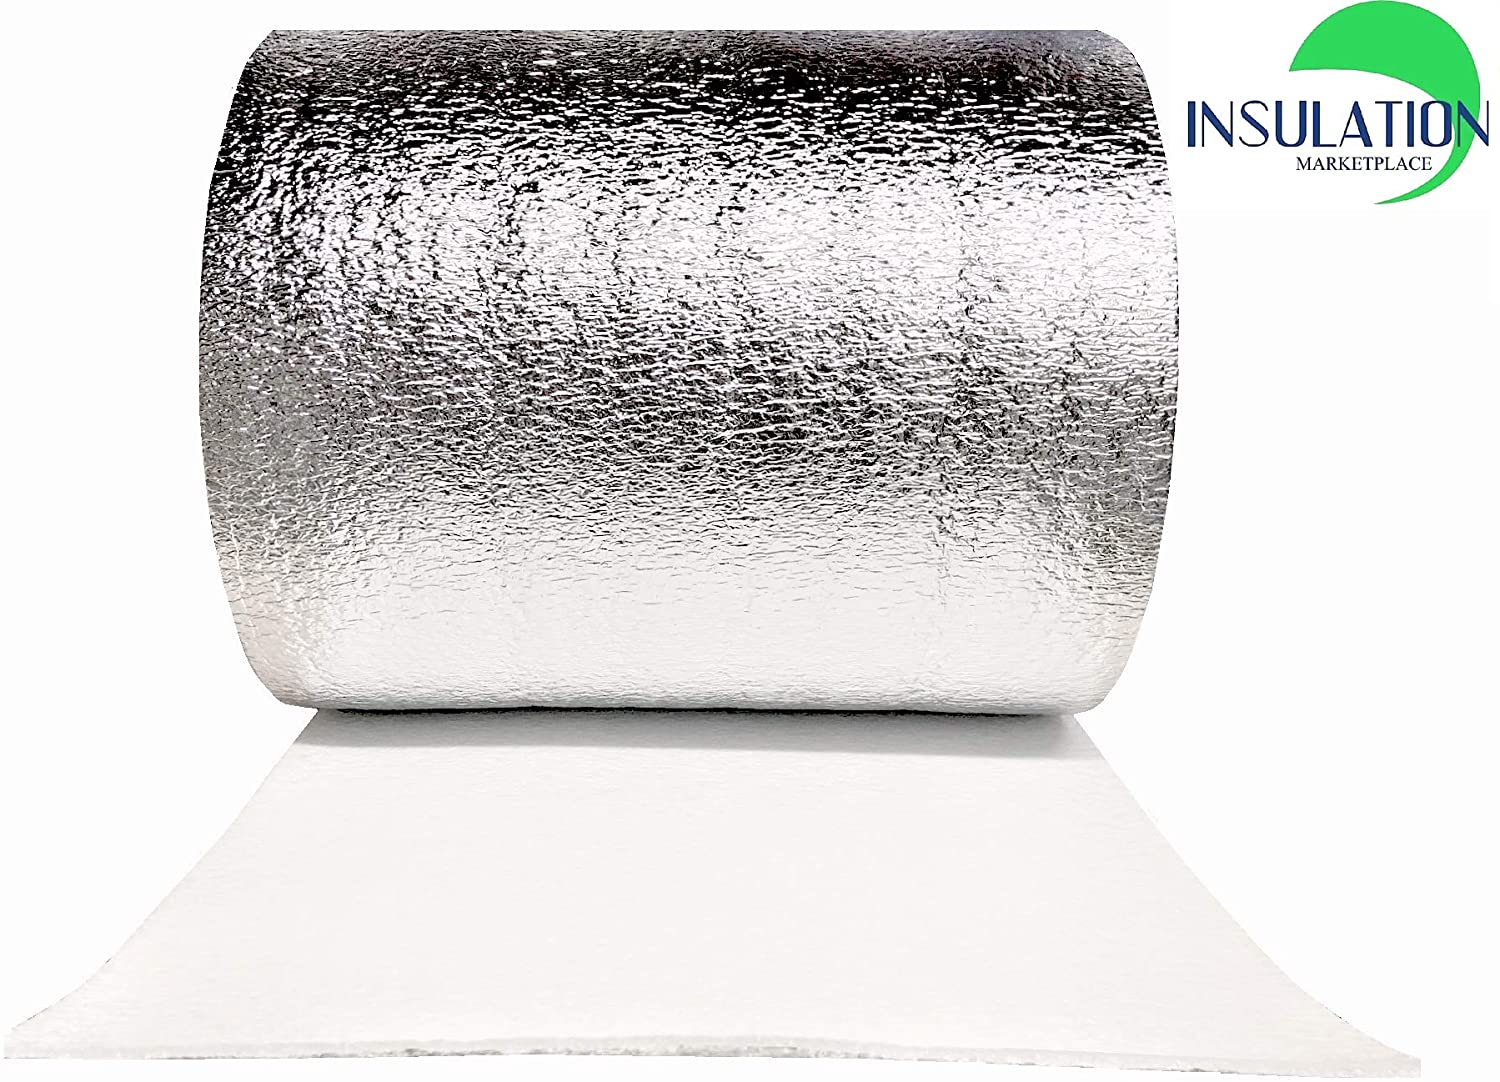 SmartSHIELD -10mm Reflective Insulation roll, Foam Core Radiant Barrier,  Thermal Insulation Shield - Engineered Foil